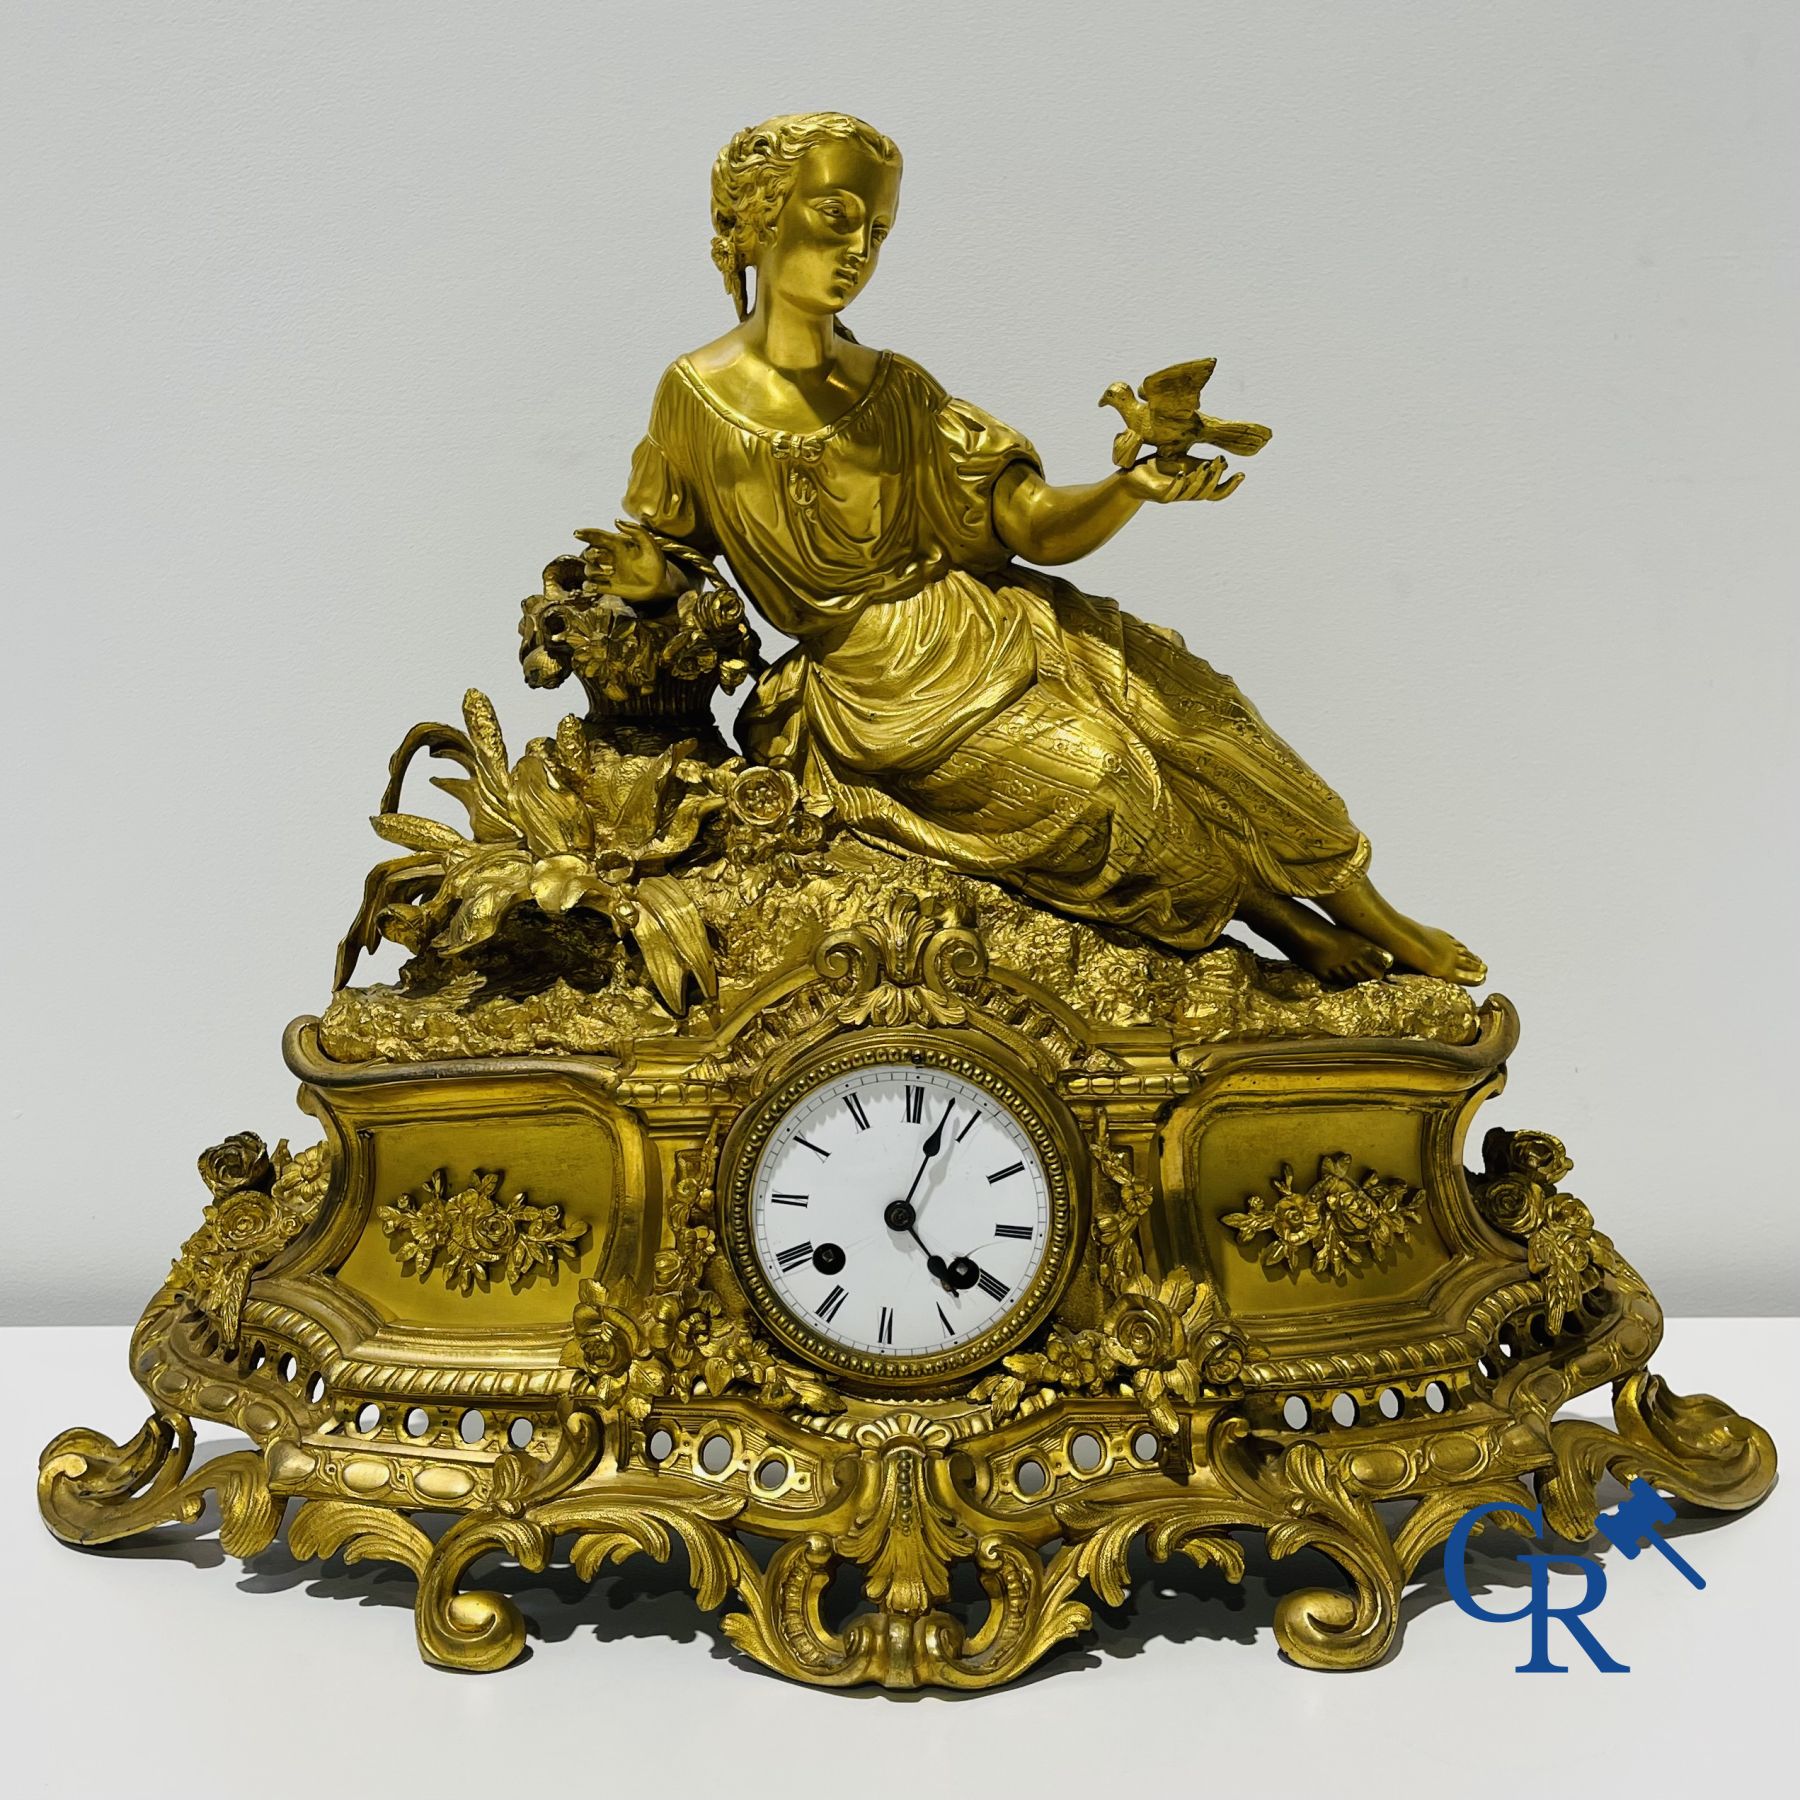 Bronze gilded clock with a romantic performance. 19th century.